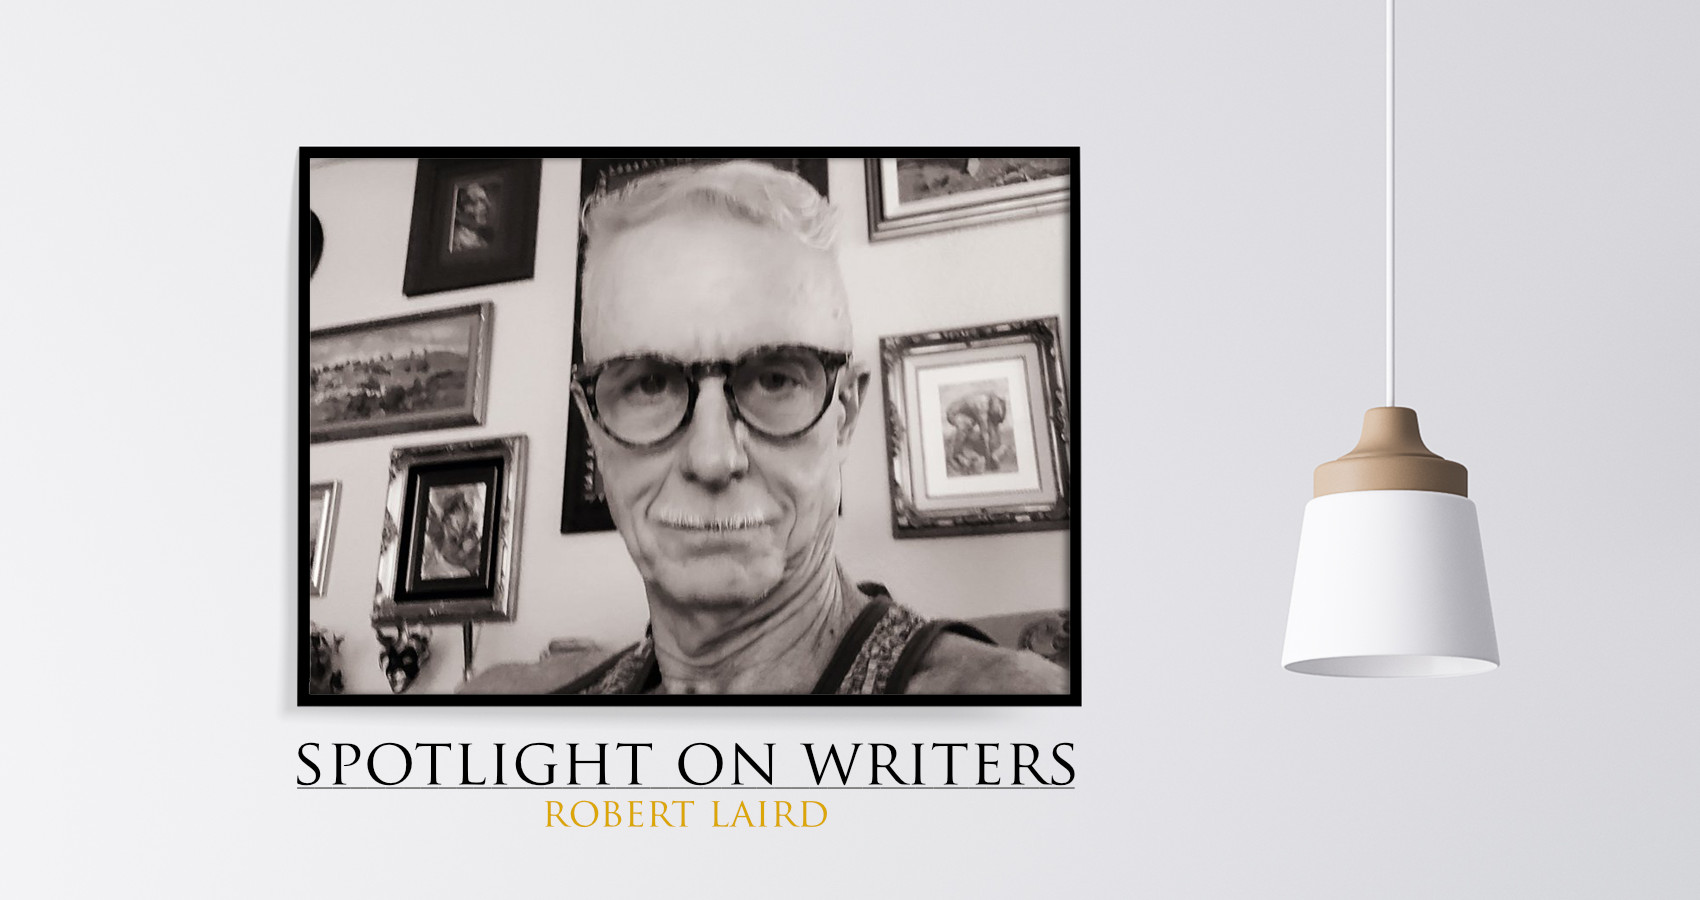 Spotlight On Writers - Robert Laird, interview at Spillwords.com